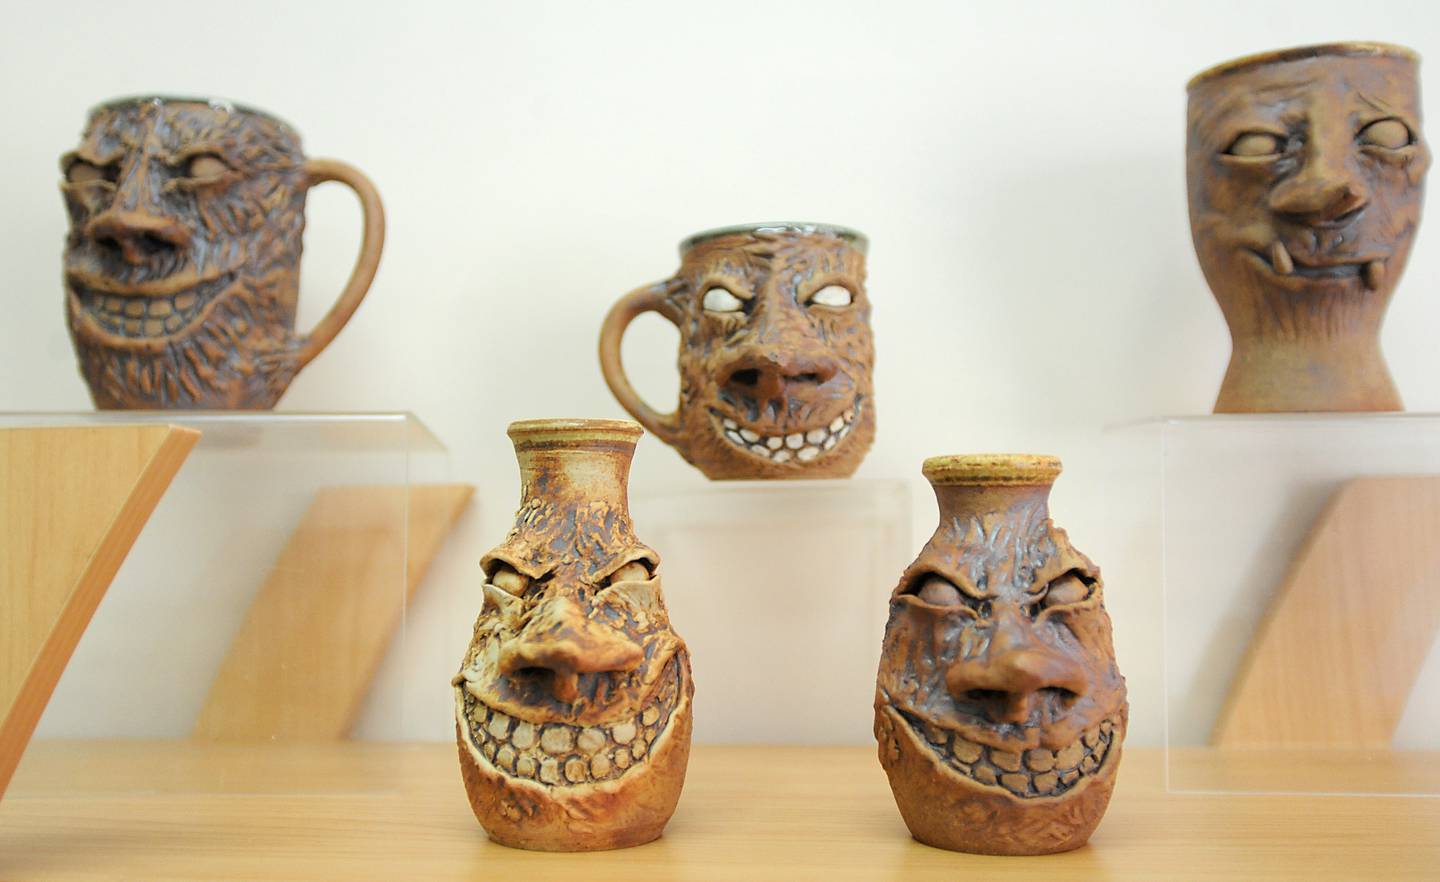 Face mugs made by artist Deanne Ferguson inside the guild's new Artisans on Main gallery on Thursday, March 10, 2022. The Clayworkers' Guild of Illinois recently moved out of the Old Courthouse and Sheriff’s House in Woodstock to a new gallery and workshop space at 220 Main St.